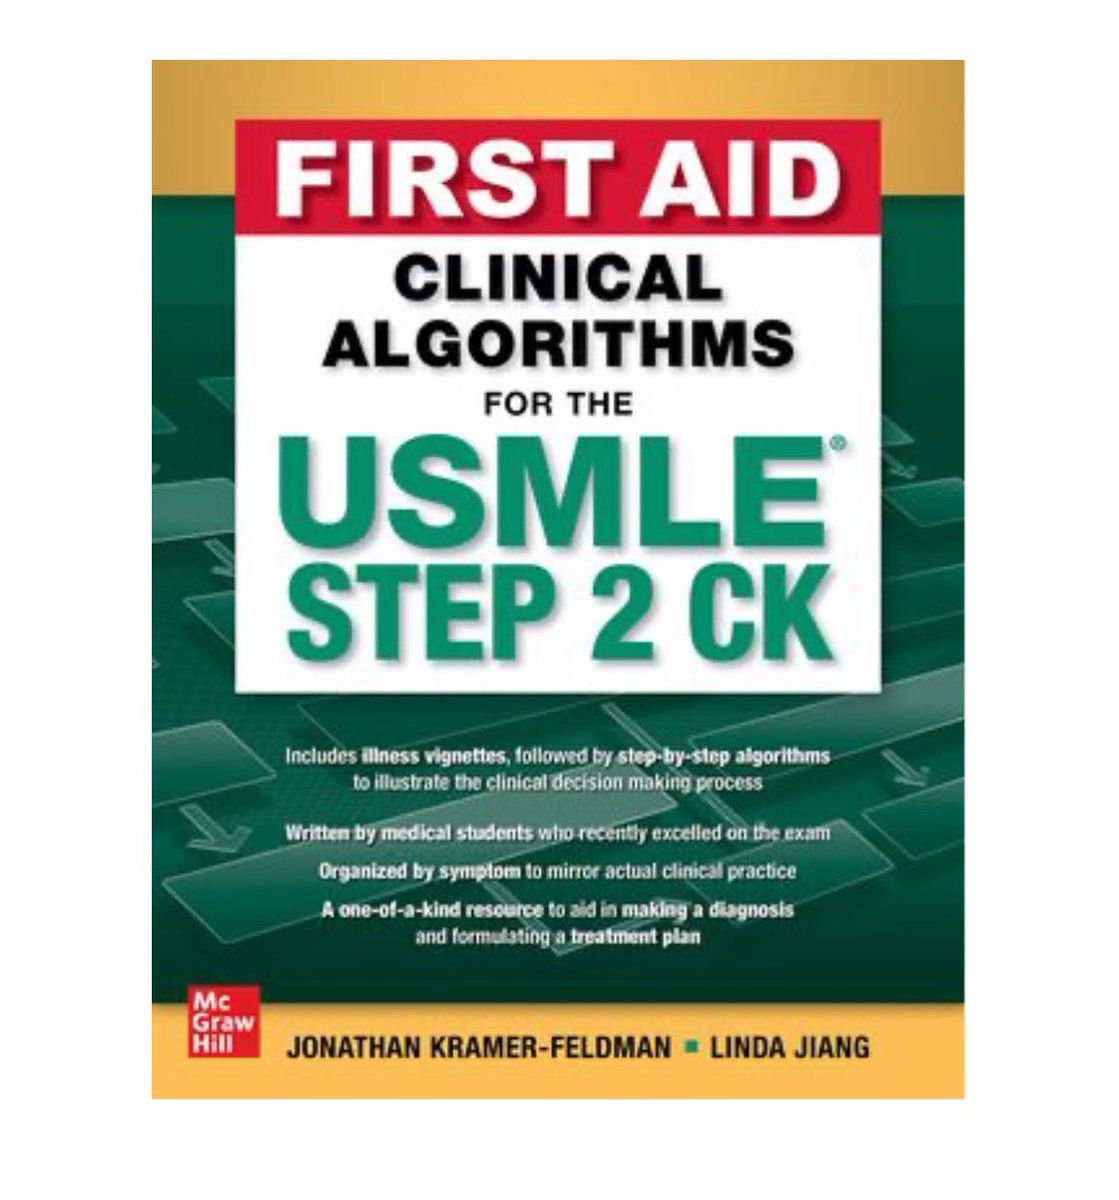 Hi #MedTwitter friends!! I wanted to tell you about a very special project I was lucky to be part of. I helped create a new textbook in the First Aid line for @TheUSMLE STEP 2CK, focused on algorithms and clinical vignettes for easier knowledge attainment 🤓. If you are a